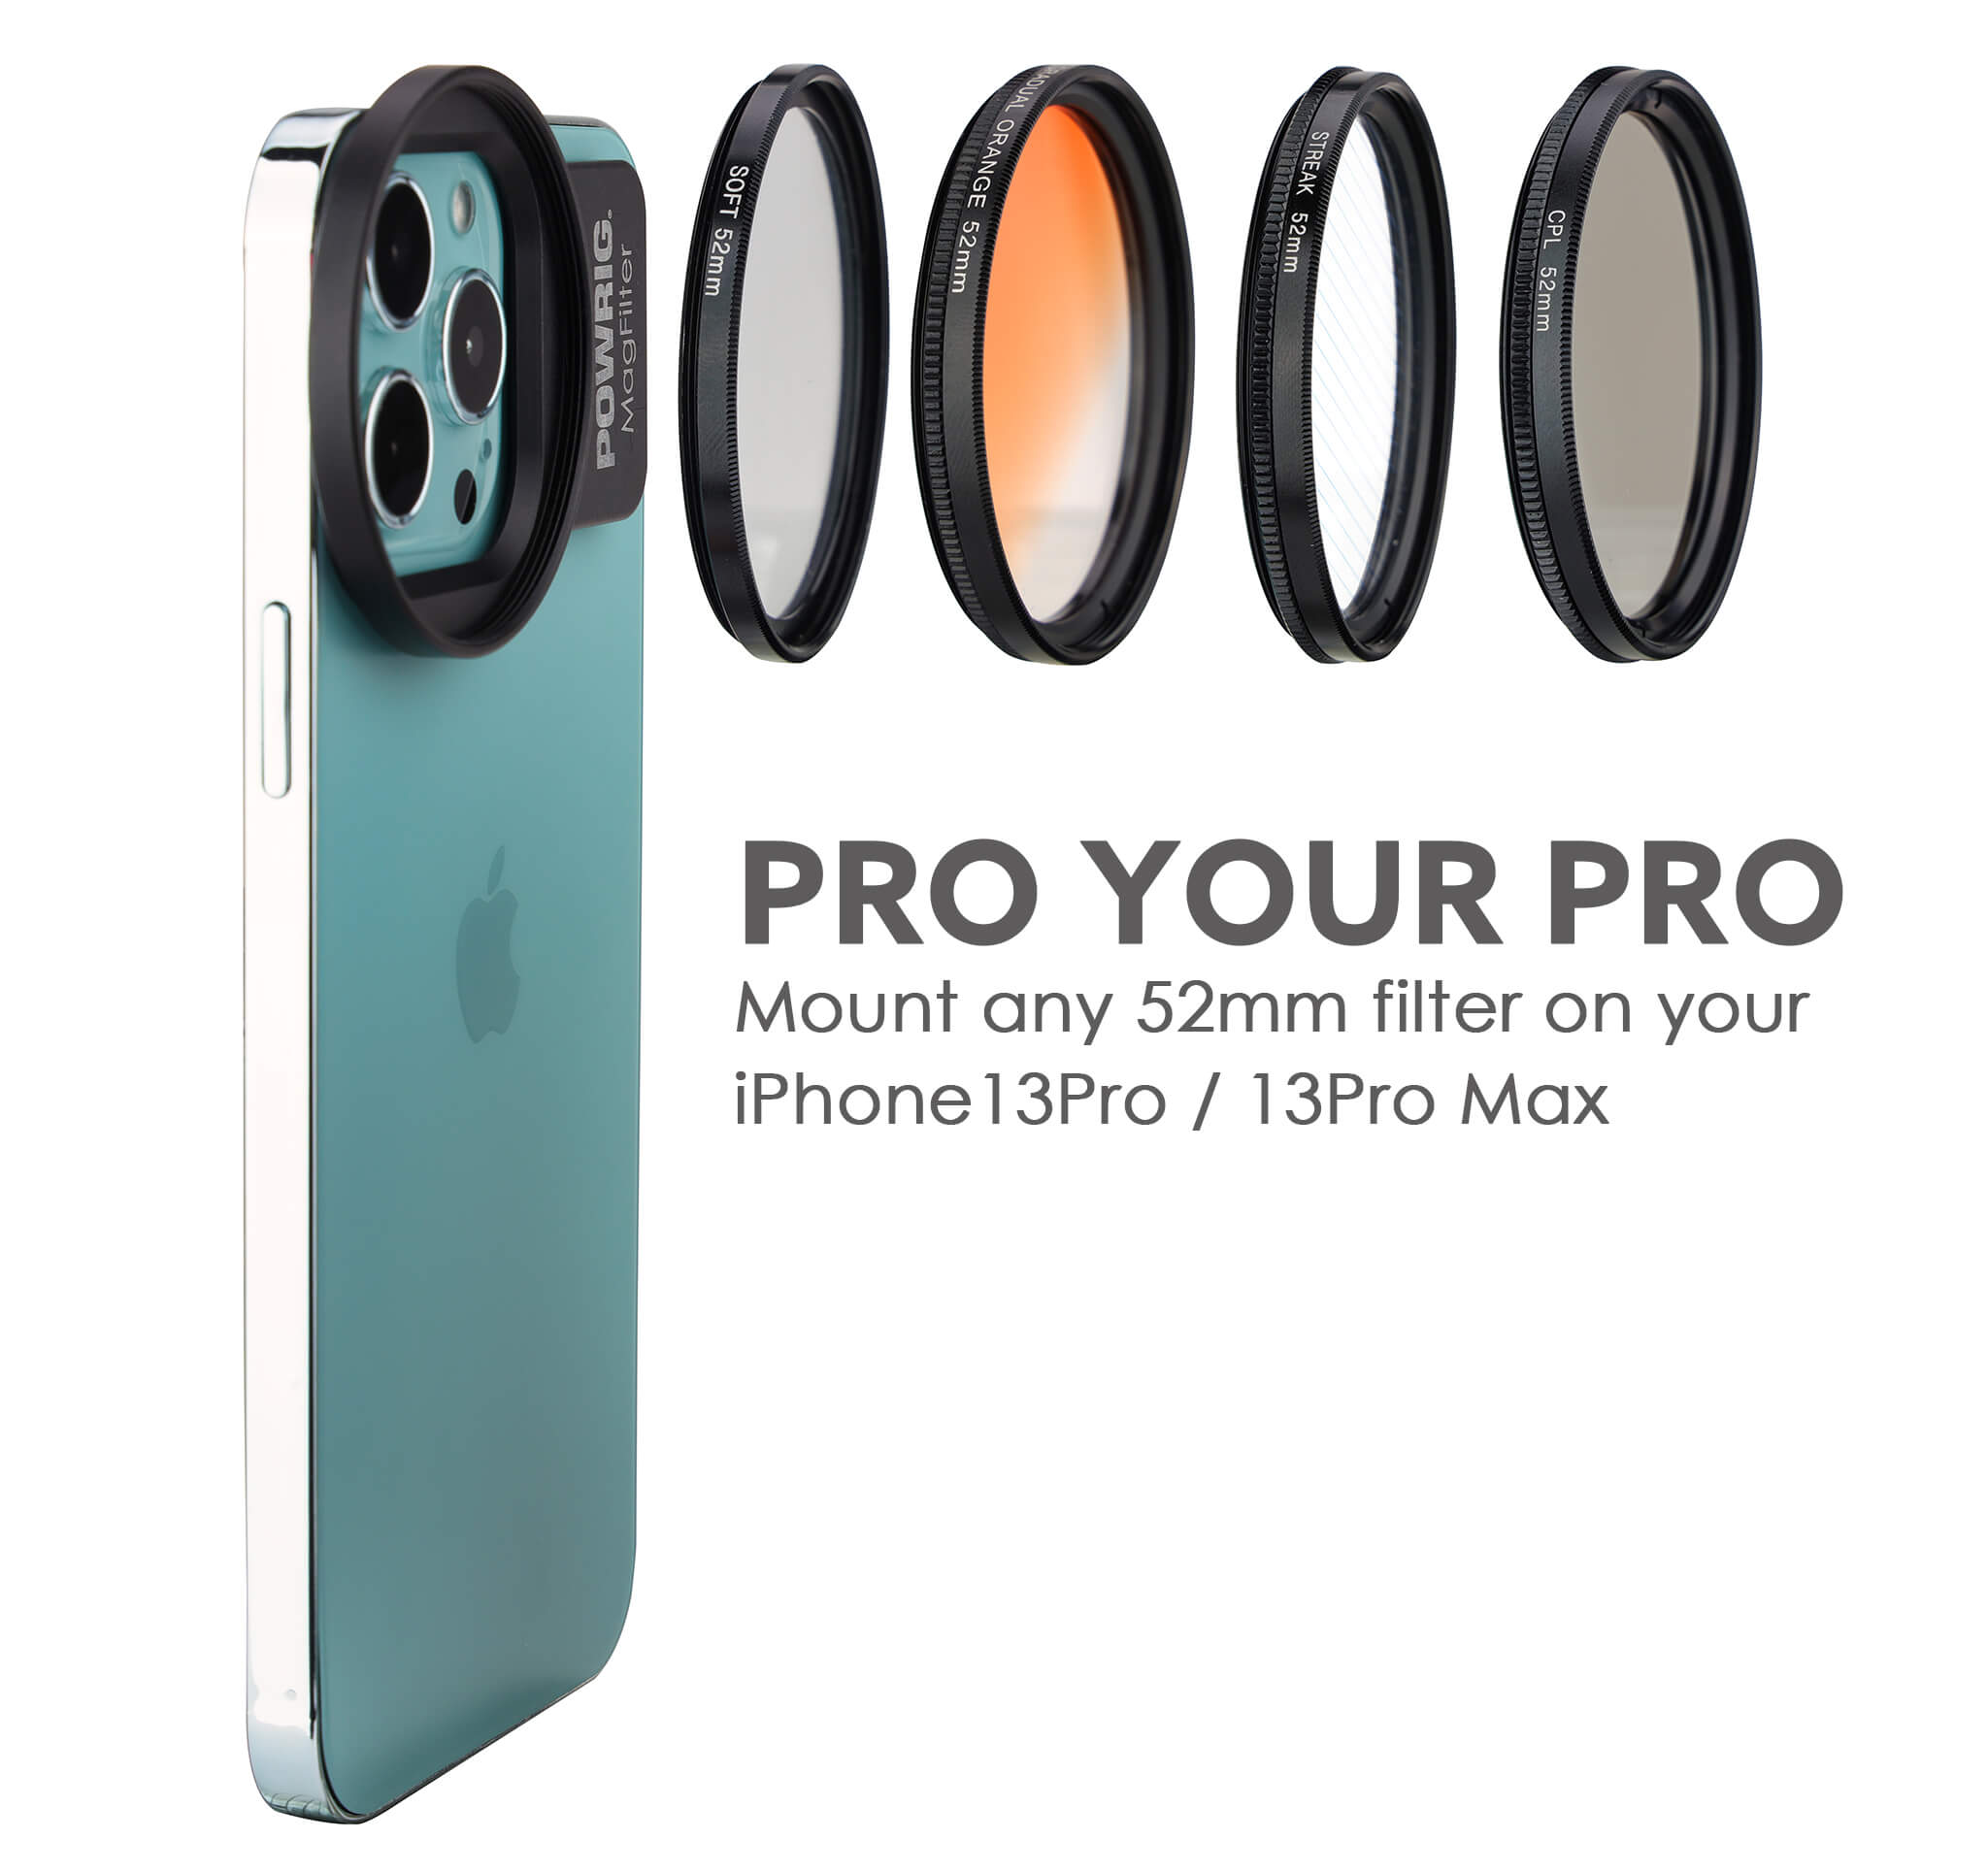 iPhone13 Pro Max Filter Mount